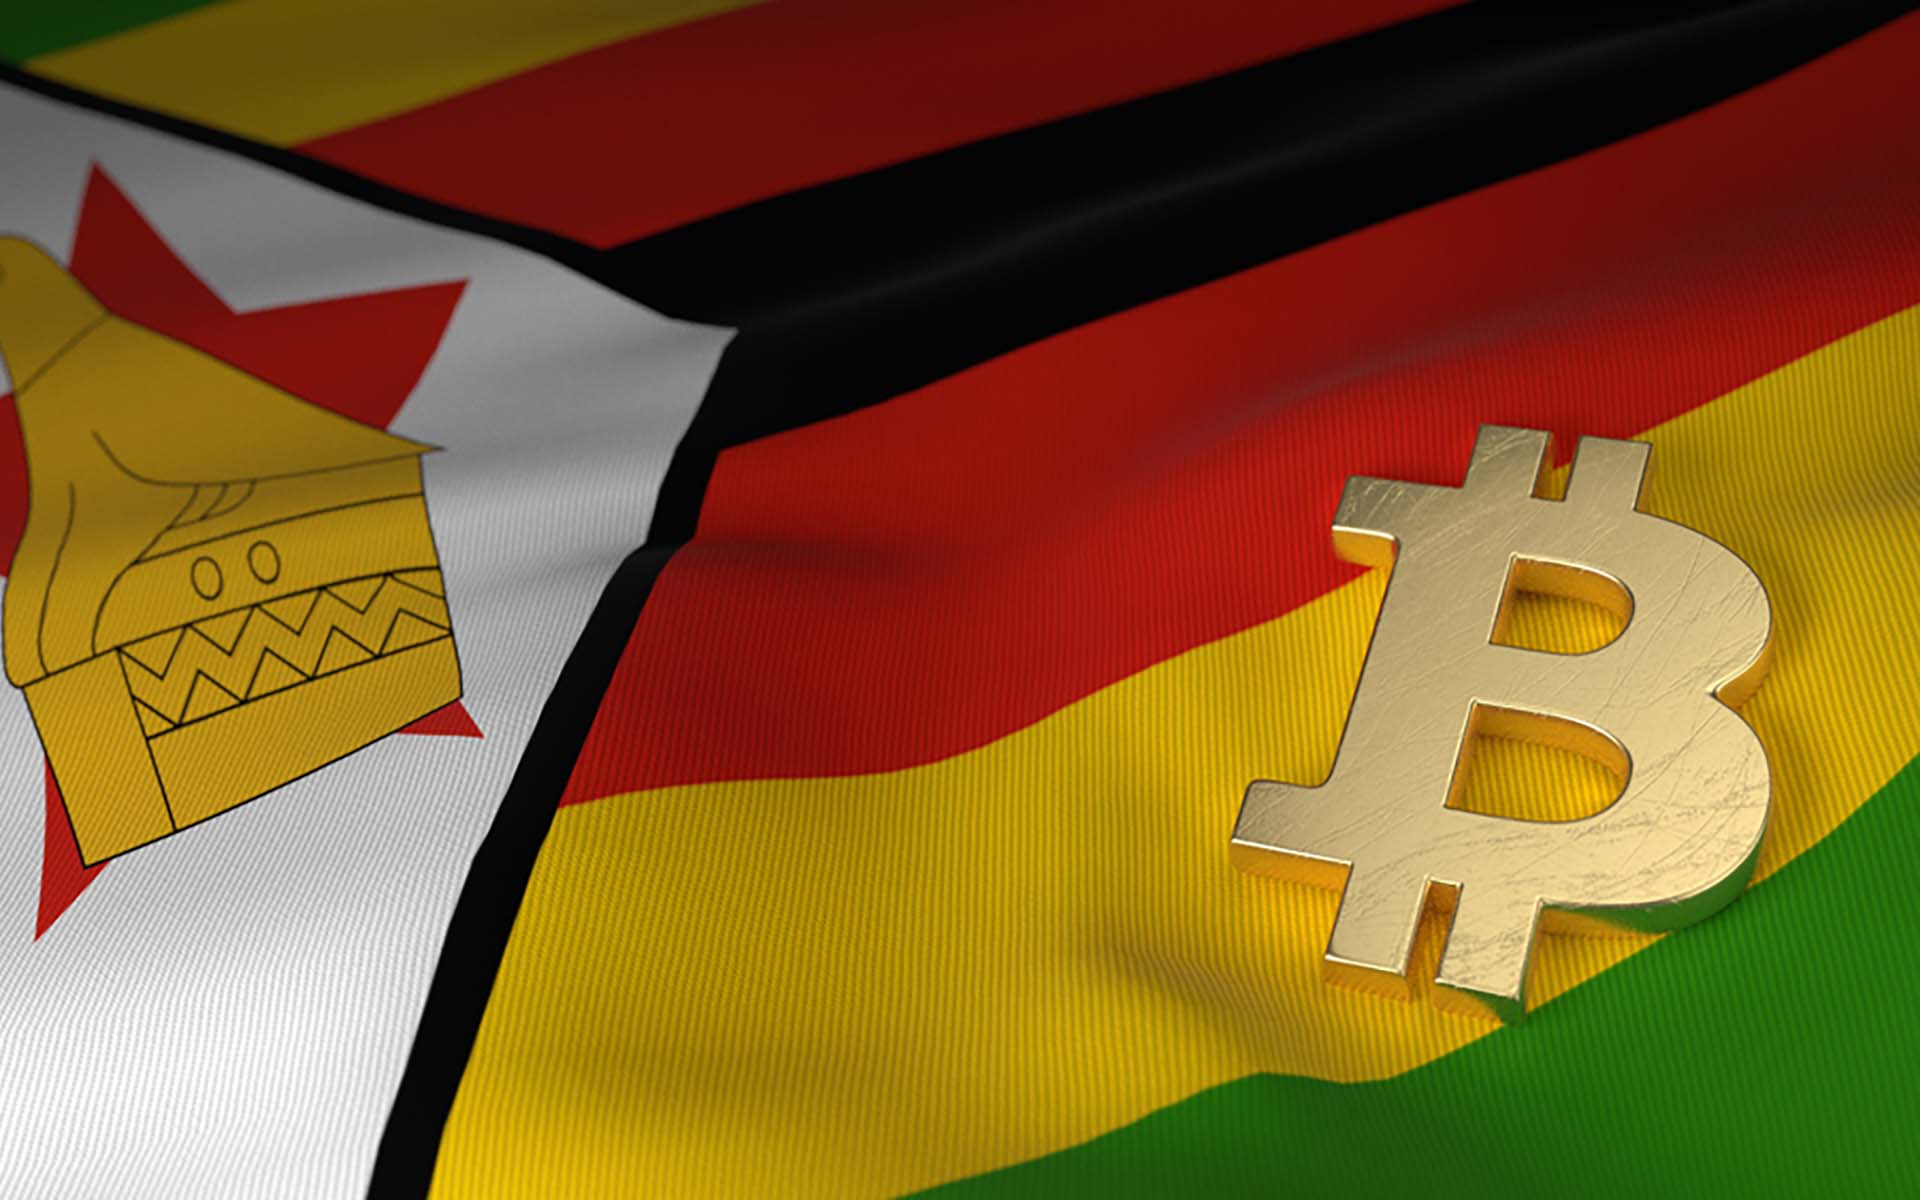 BTC in Zimbabwe?  LIE! – Here is the truth!